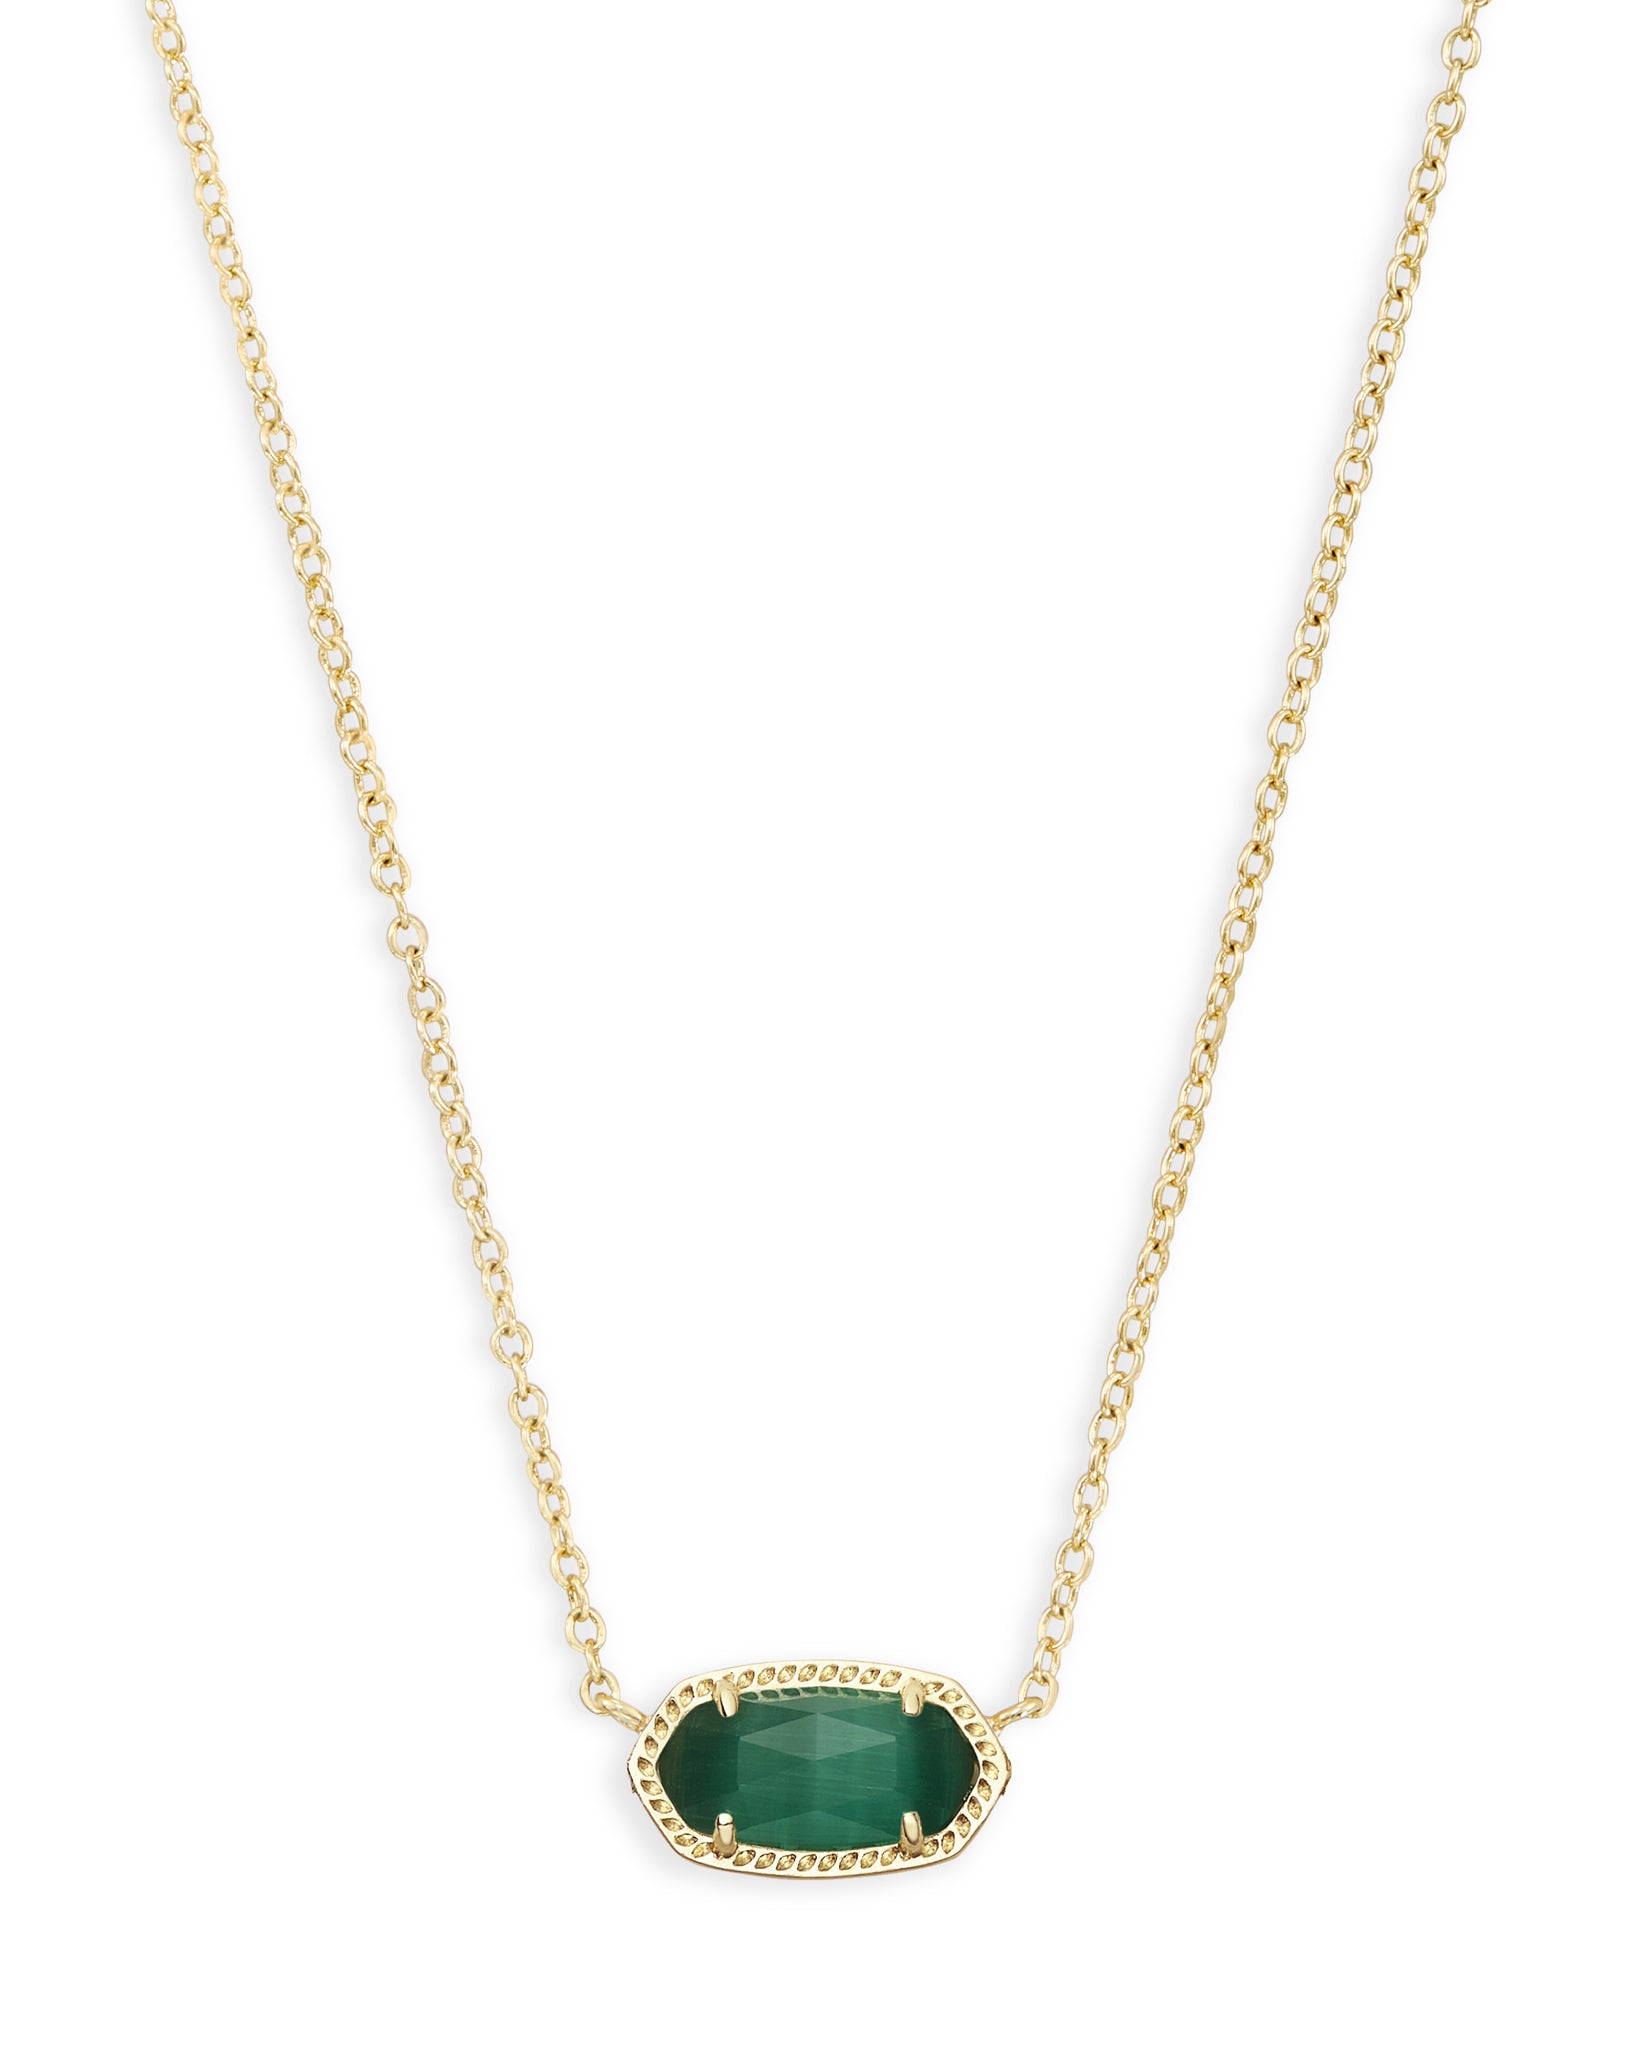 Kendra Scott Elisa Oval Pendant Necklace in Emerald Green Cats Eye and Gold